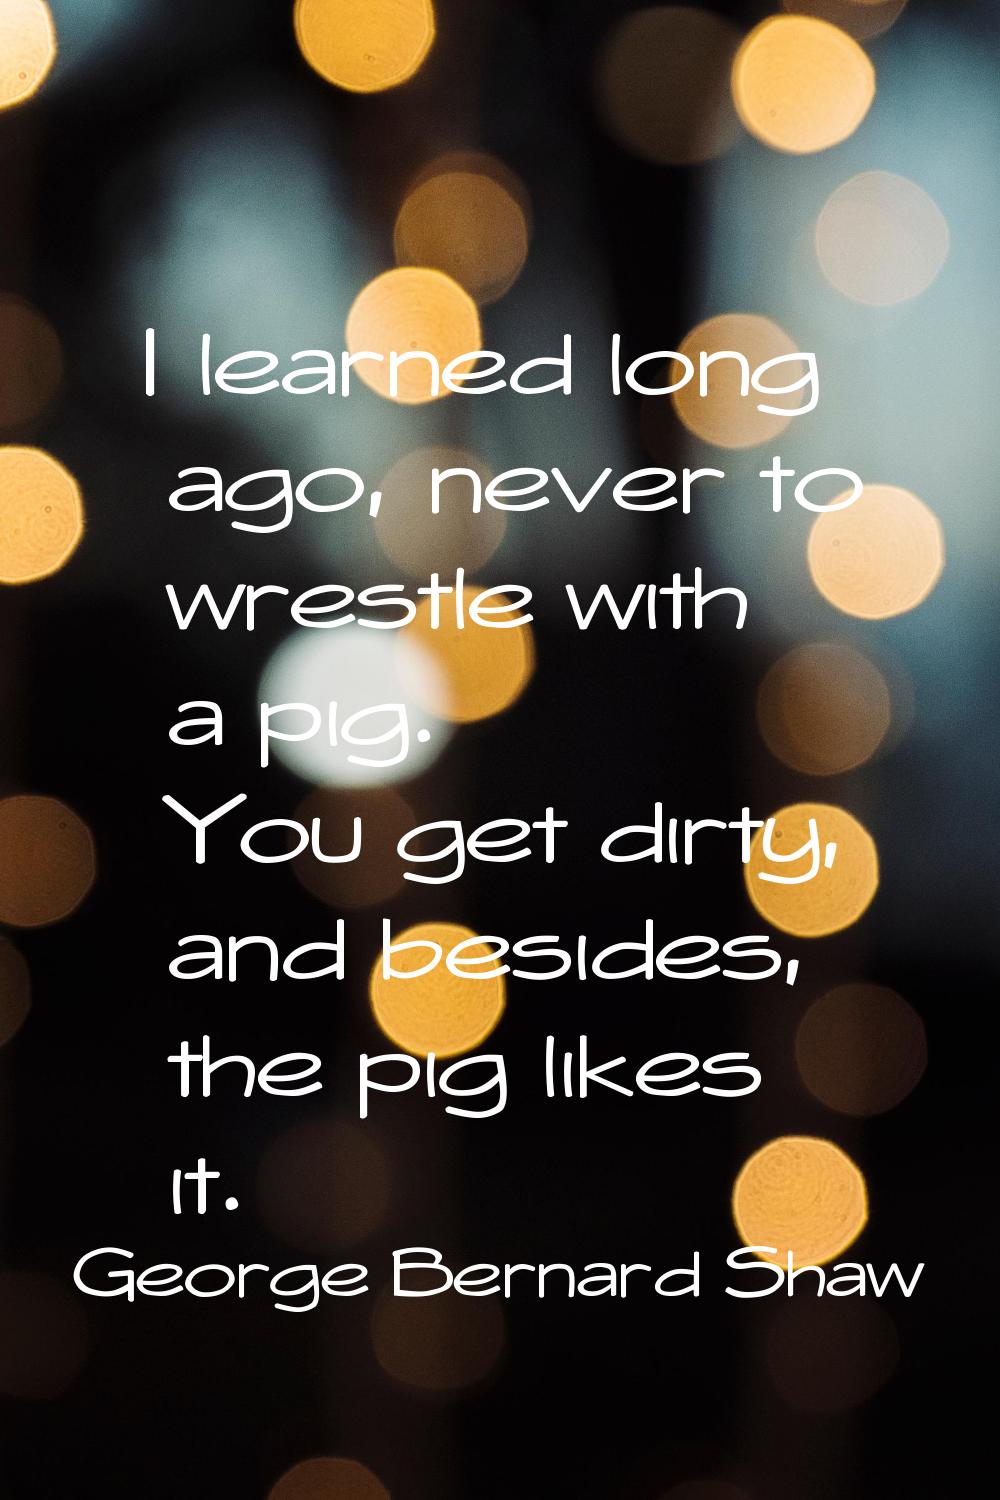 I learned long ago, never to wrestle with a pig. You get dirty, and besides, the pig likes it.